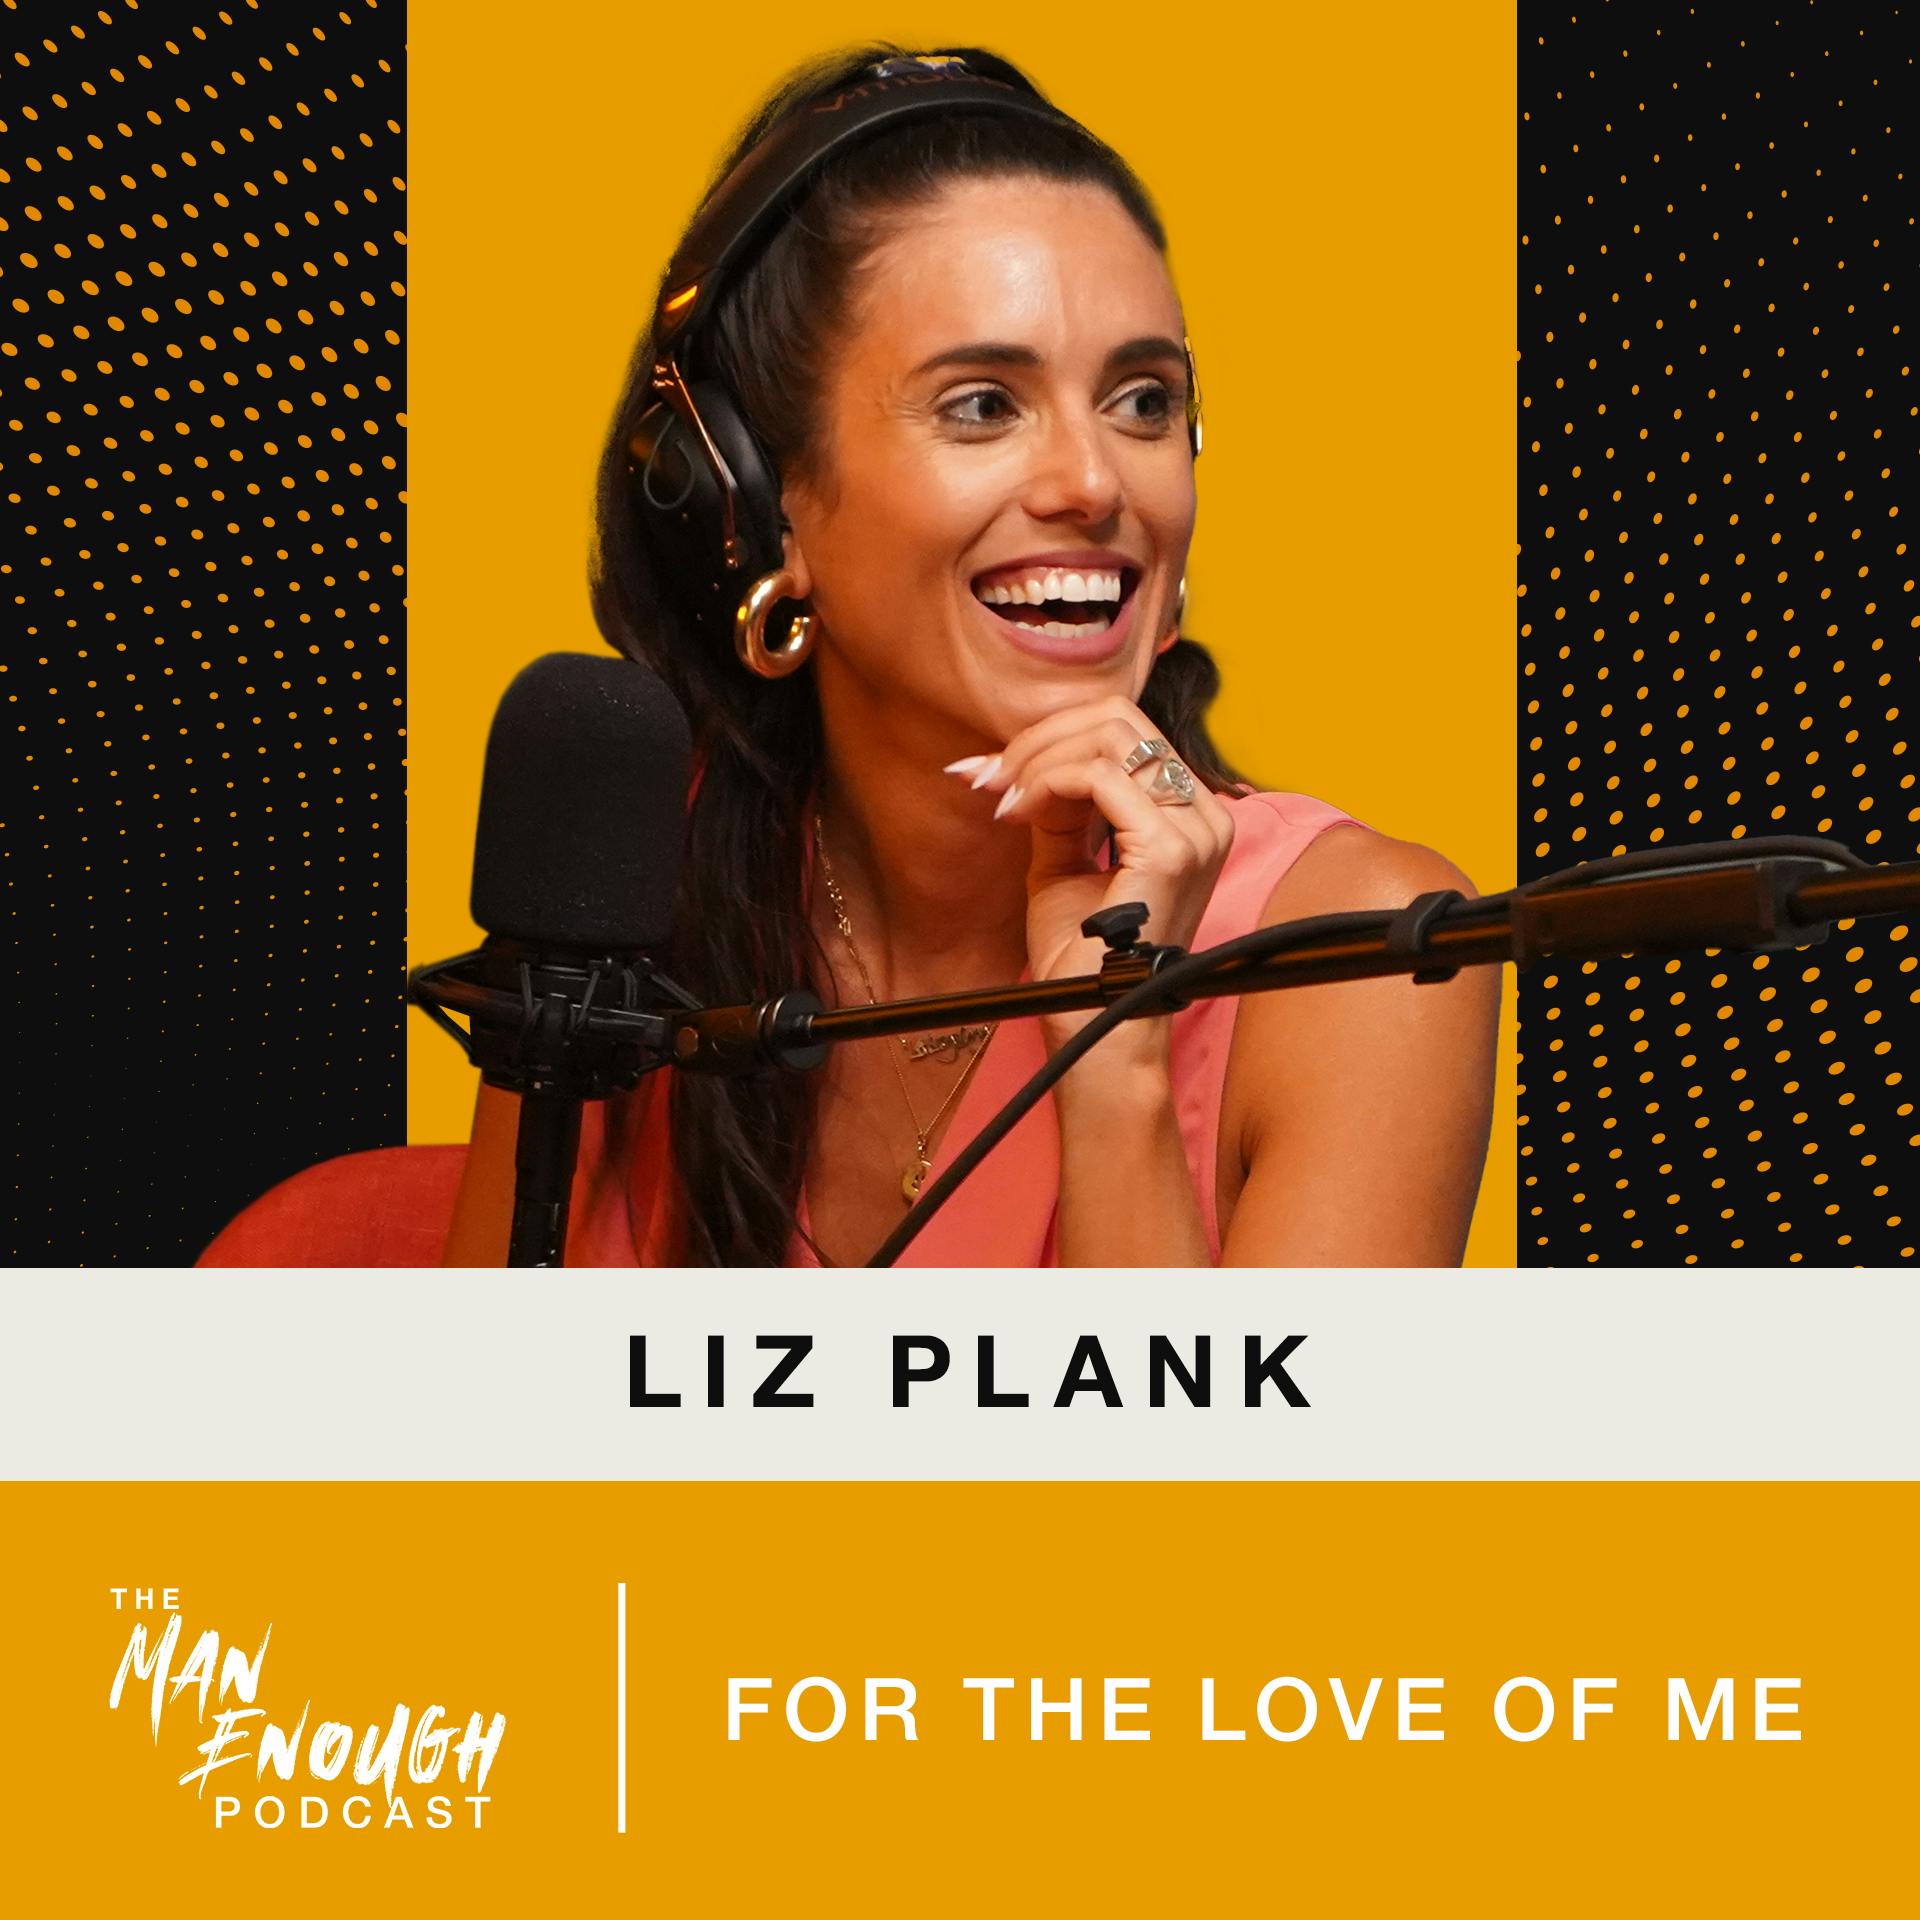 Liz Plank: For the Love of Me